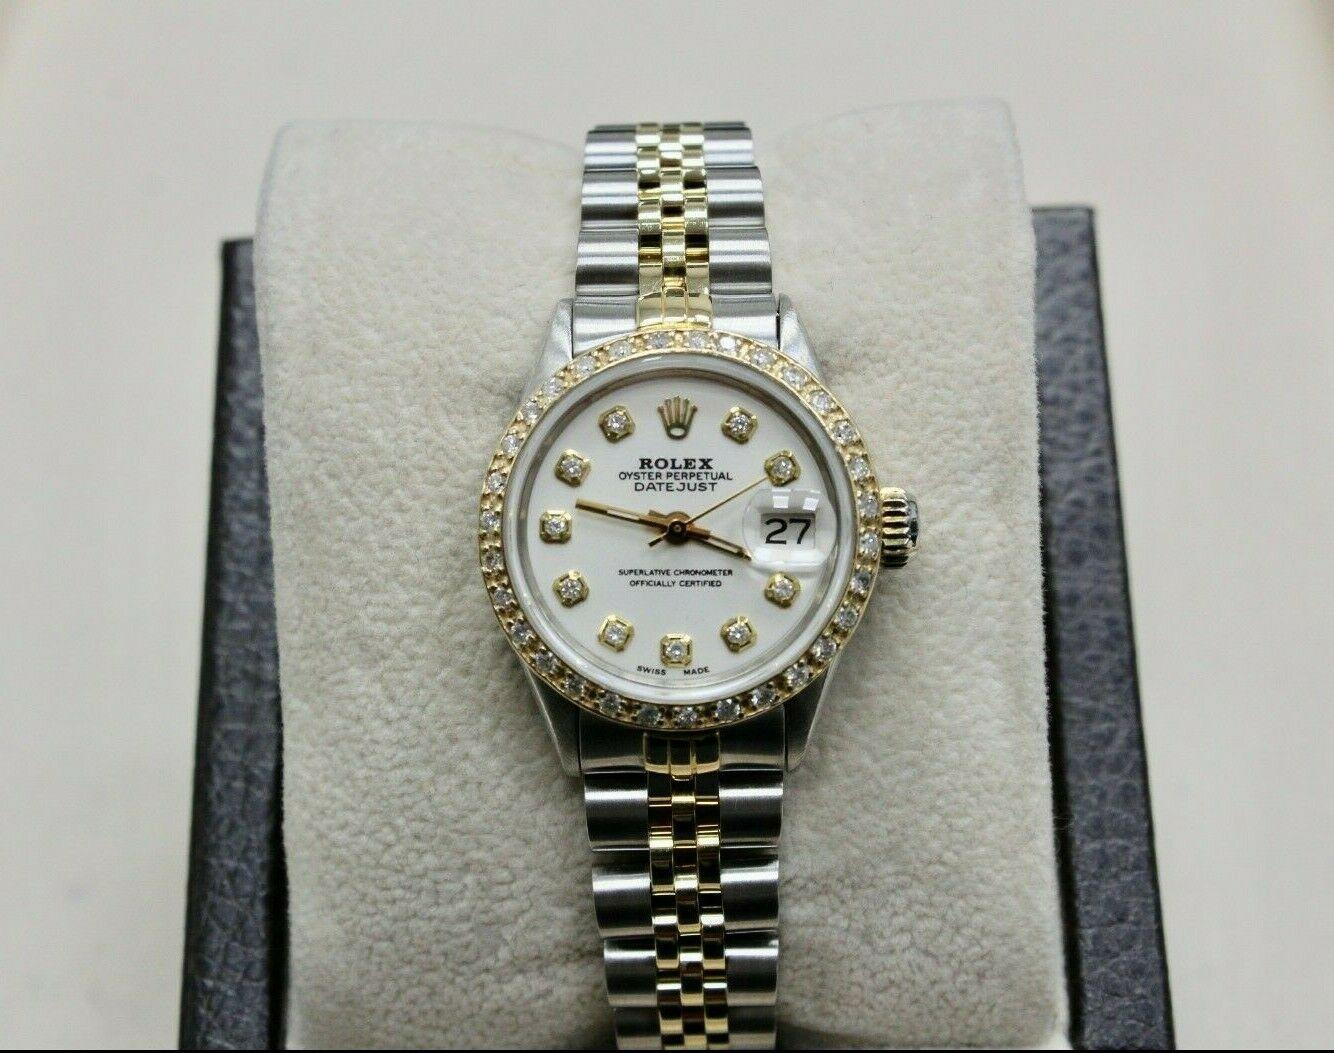 Style Number: 6516
Serial: 2449***
Model: Ladies Datejust
Case Material: Stainless Steel
Band: 14K Yellow Gold & Stainless Steel 
Bezel: Custom Diamond Bezel
Dial: Custom Diamond Dial 
Face: Sapphire Crystal
Case Size: 26mm
Includes: 
-Elegant Watch